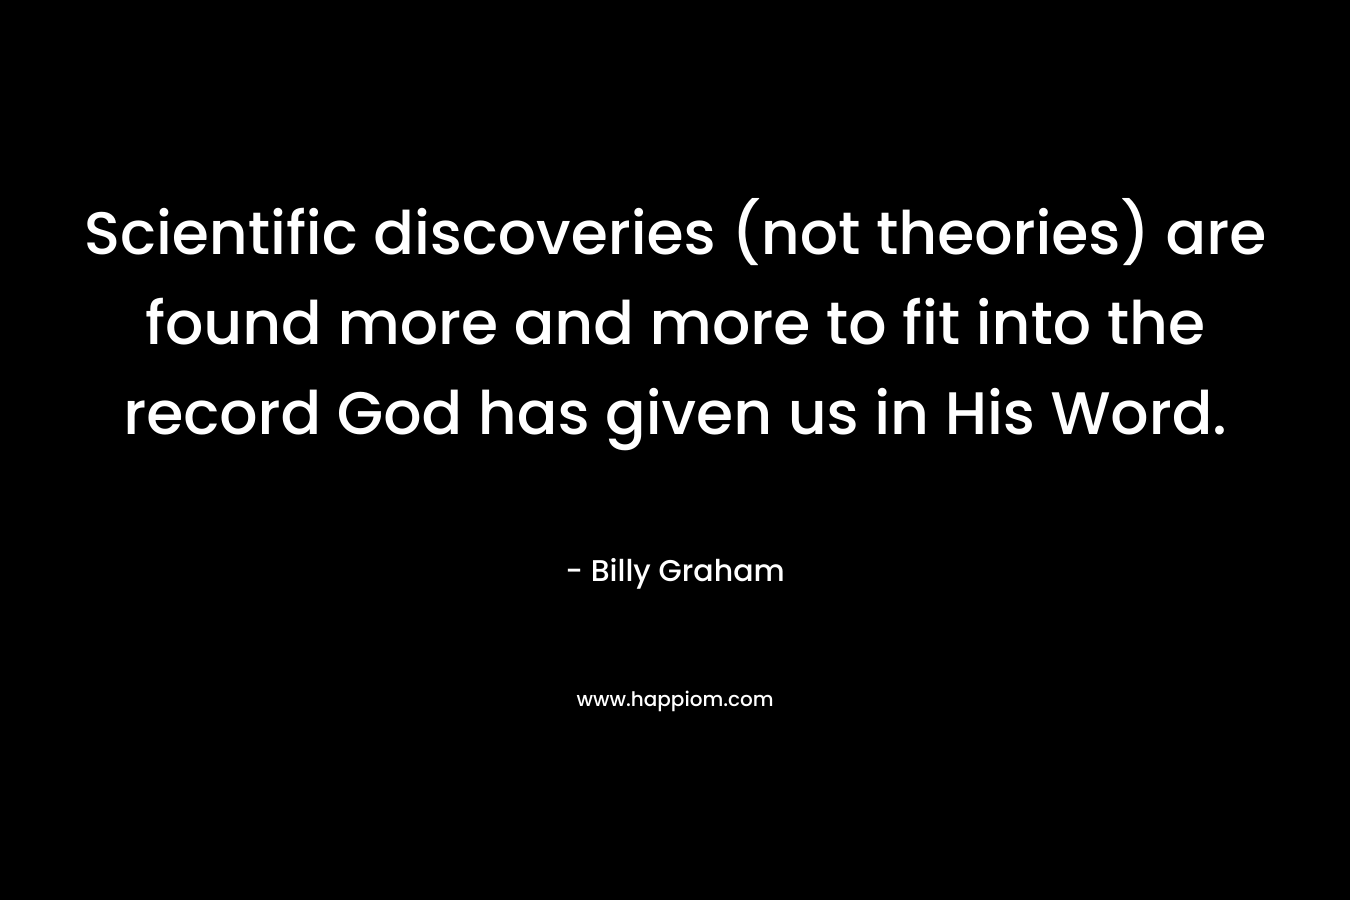 Scientific discoveries (not theories) are found more and more to fit into the record God has given us in His Word.